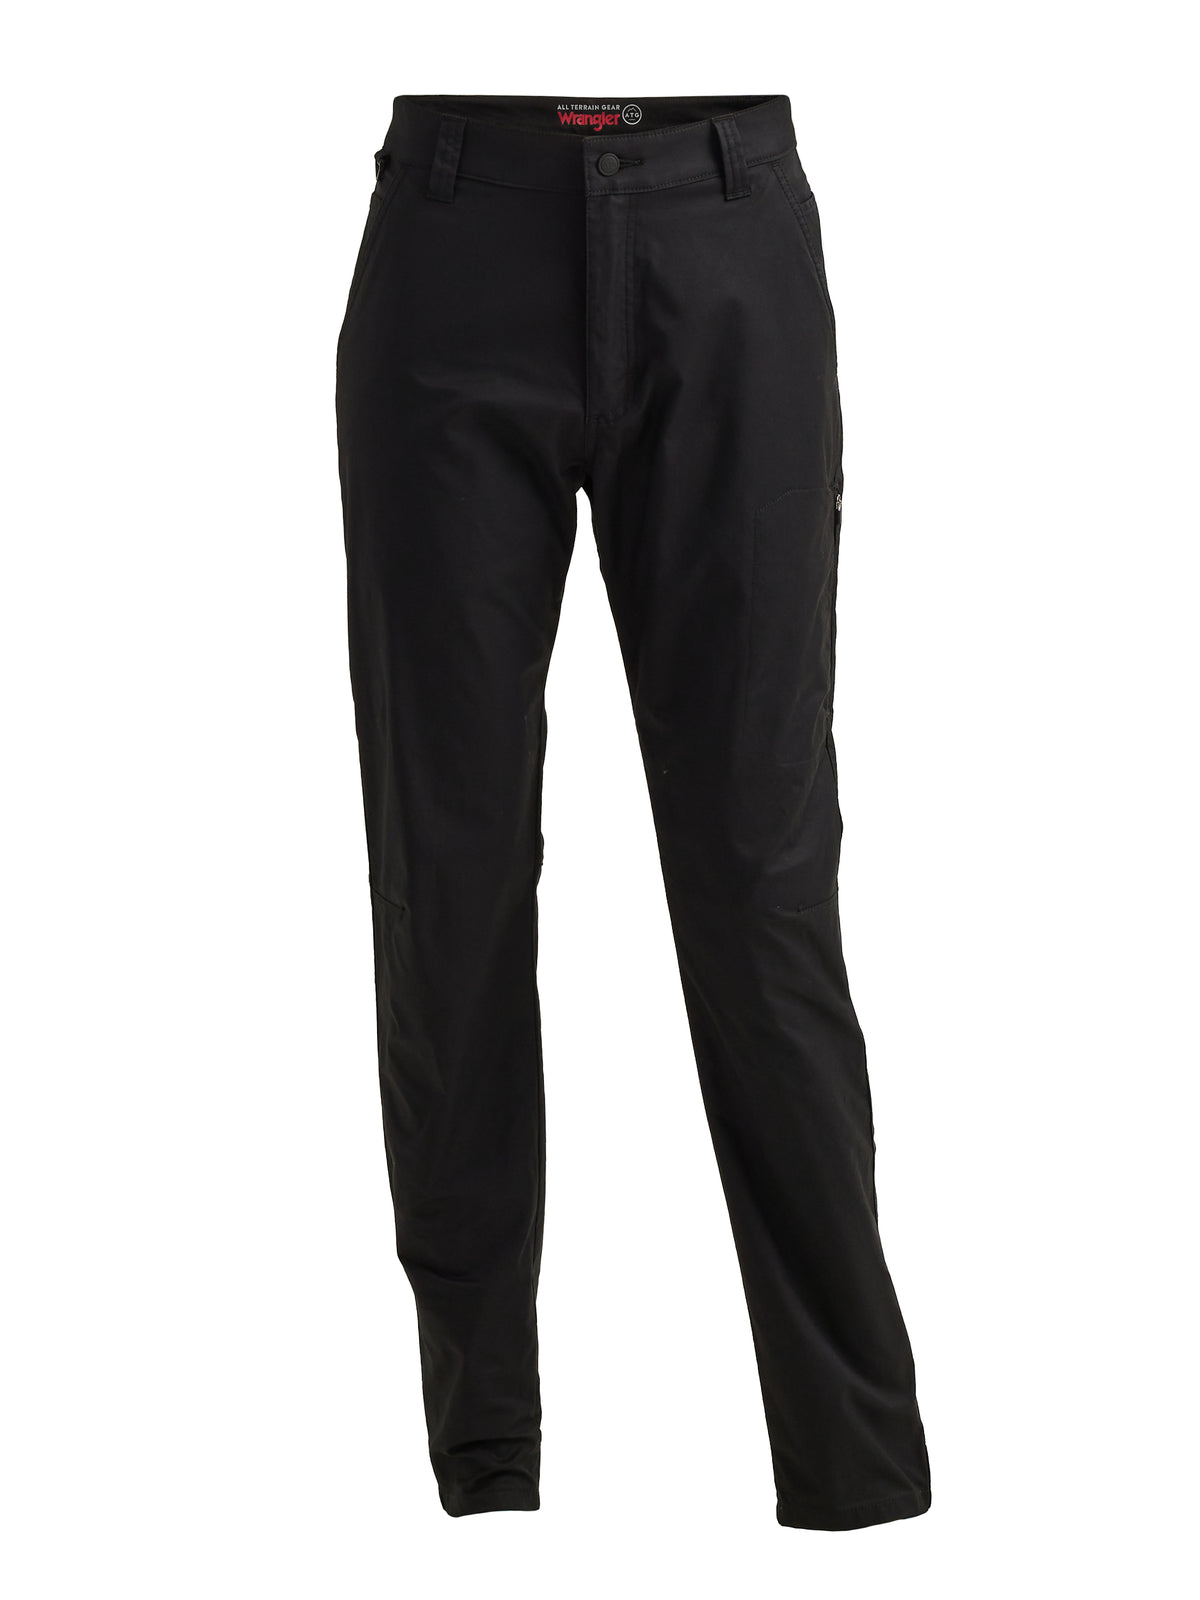 All Terrain Gear Sustainable Utility Pant in Black